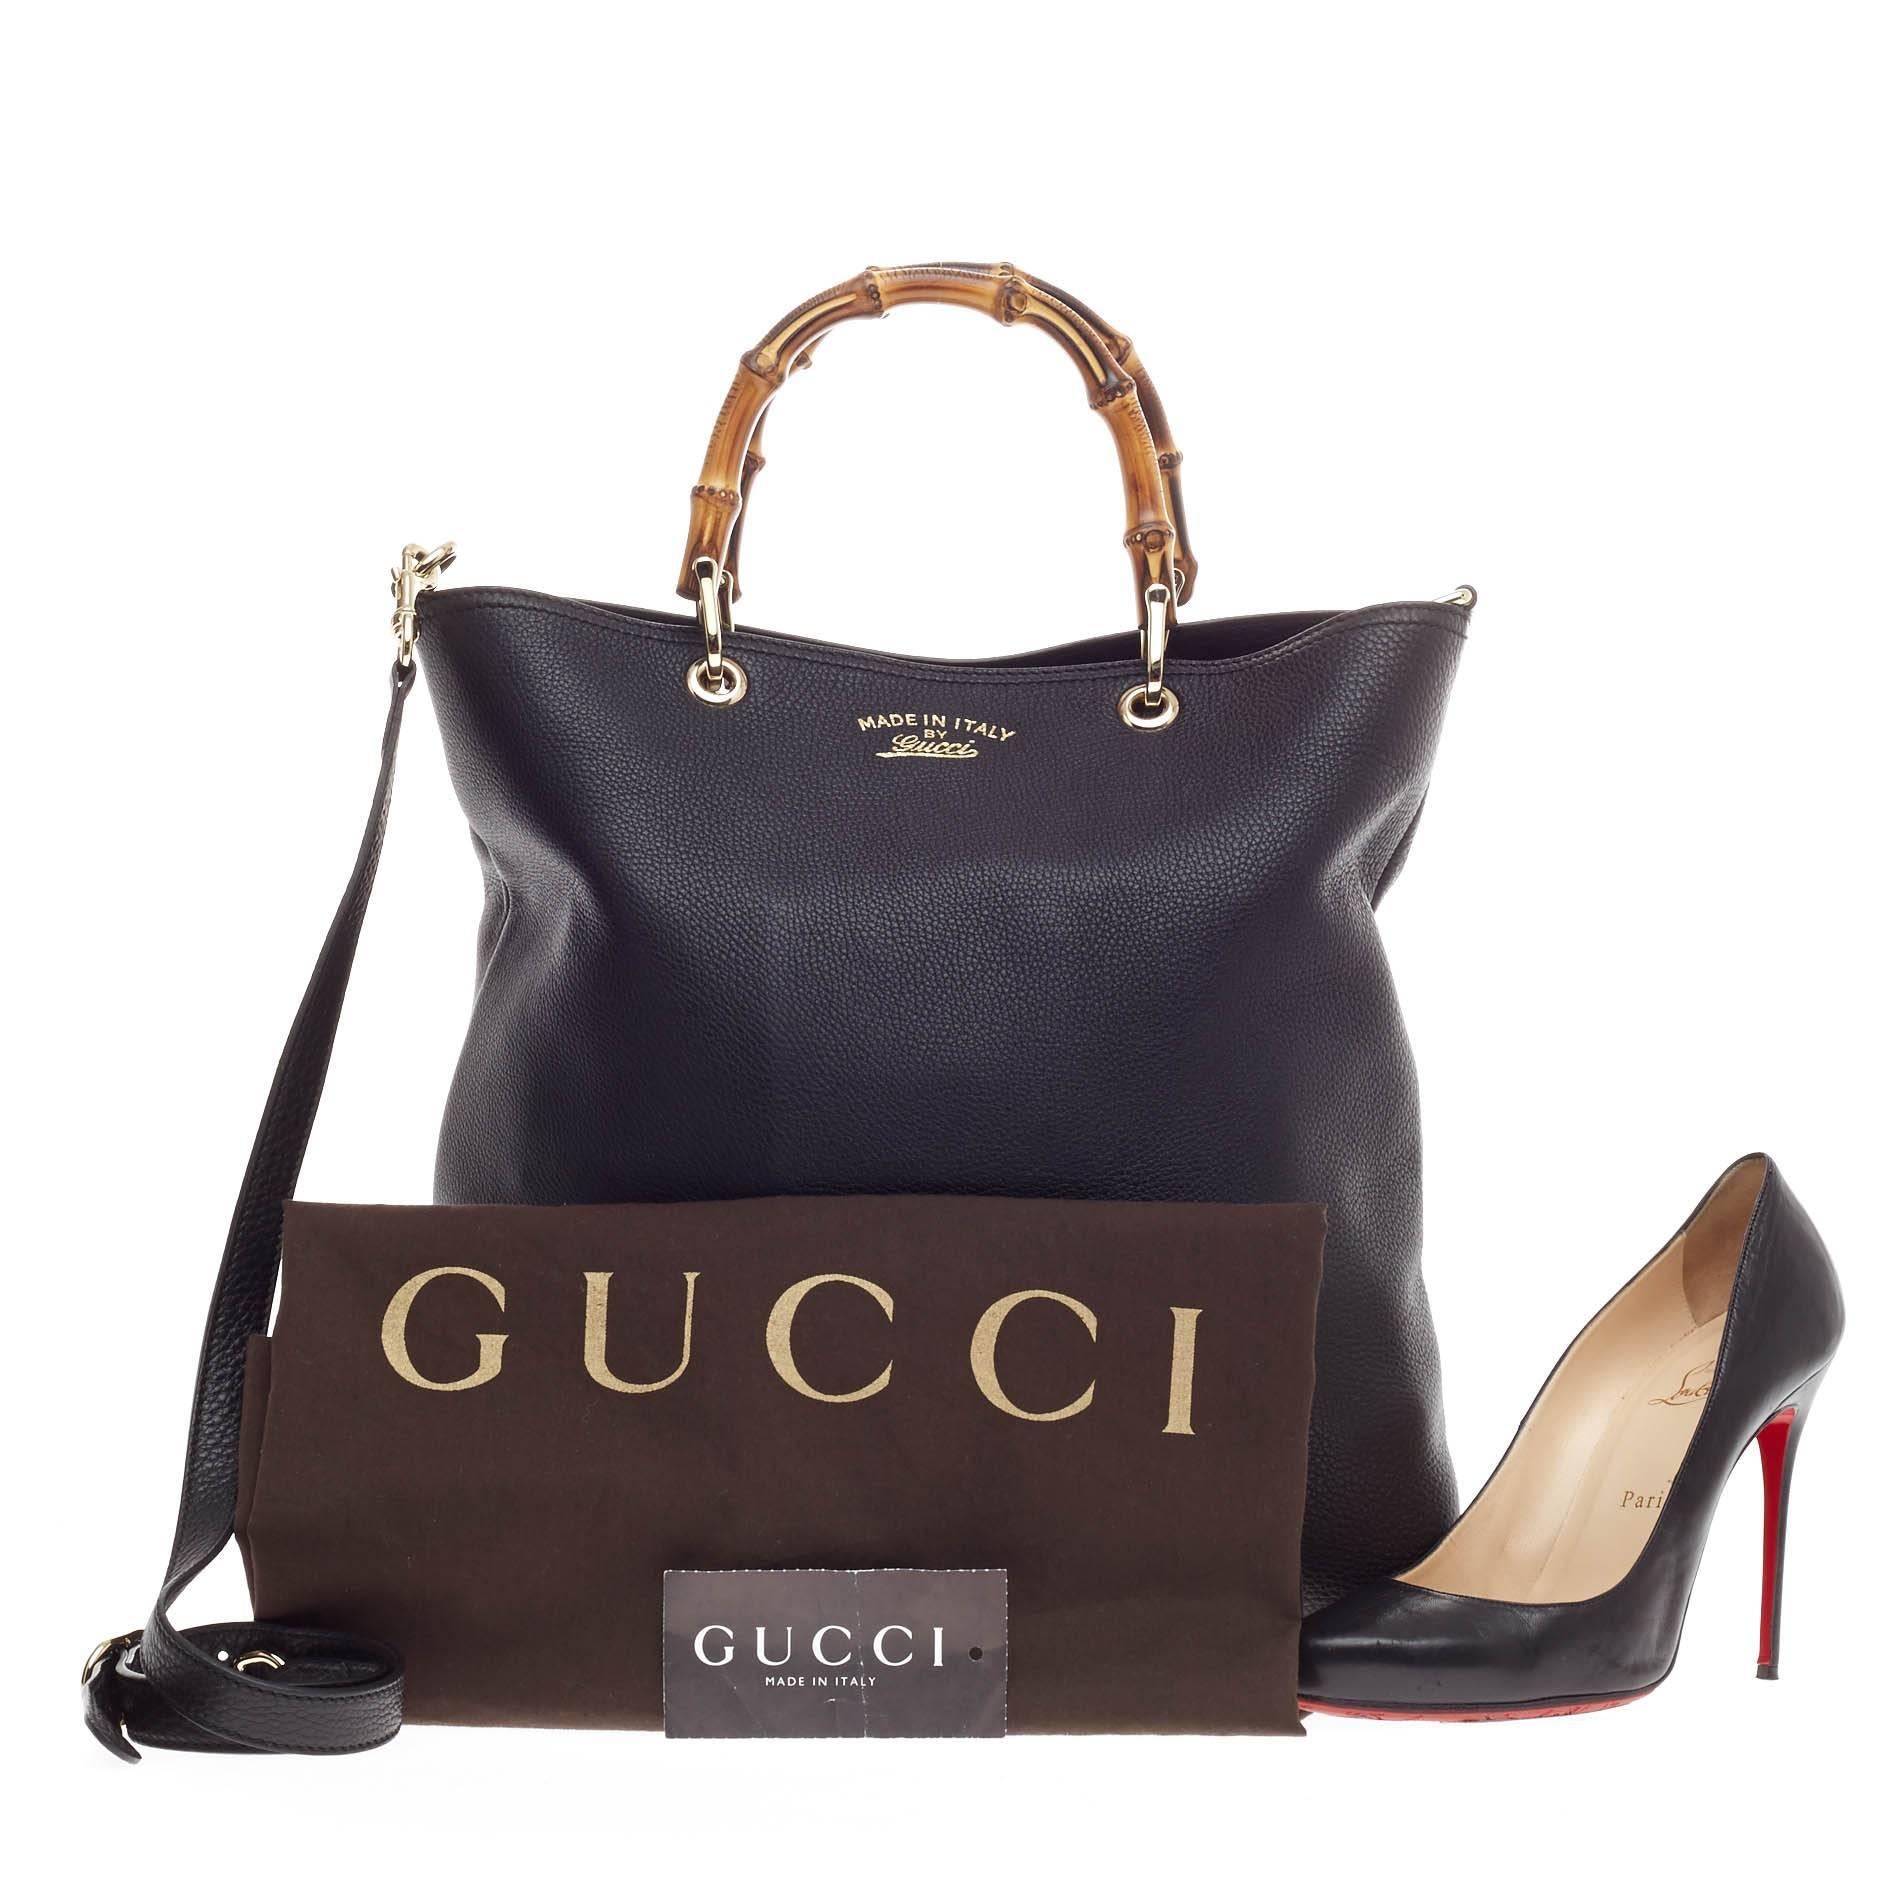 This authentic Gucci Bamboo Shopper Tote Leather Tall is a classic must-have. Crafted in classic black grainy leather, this vertical tote features Gucci's signature sturdy bamboo handles, stamped logo at the front and faded gold-tone hardware